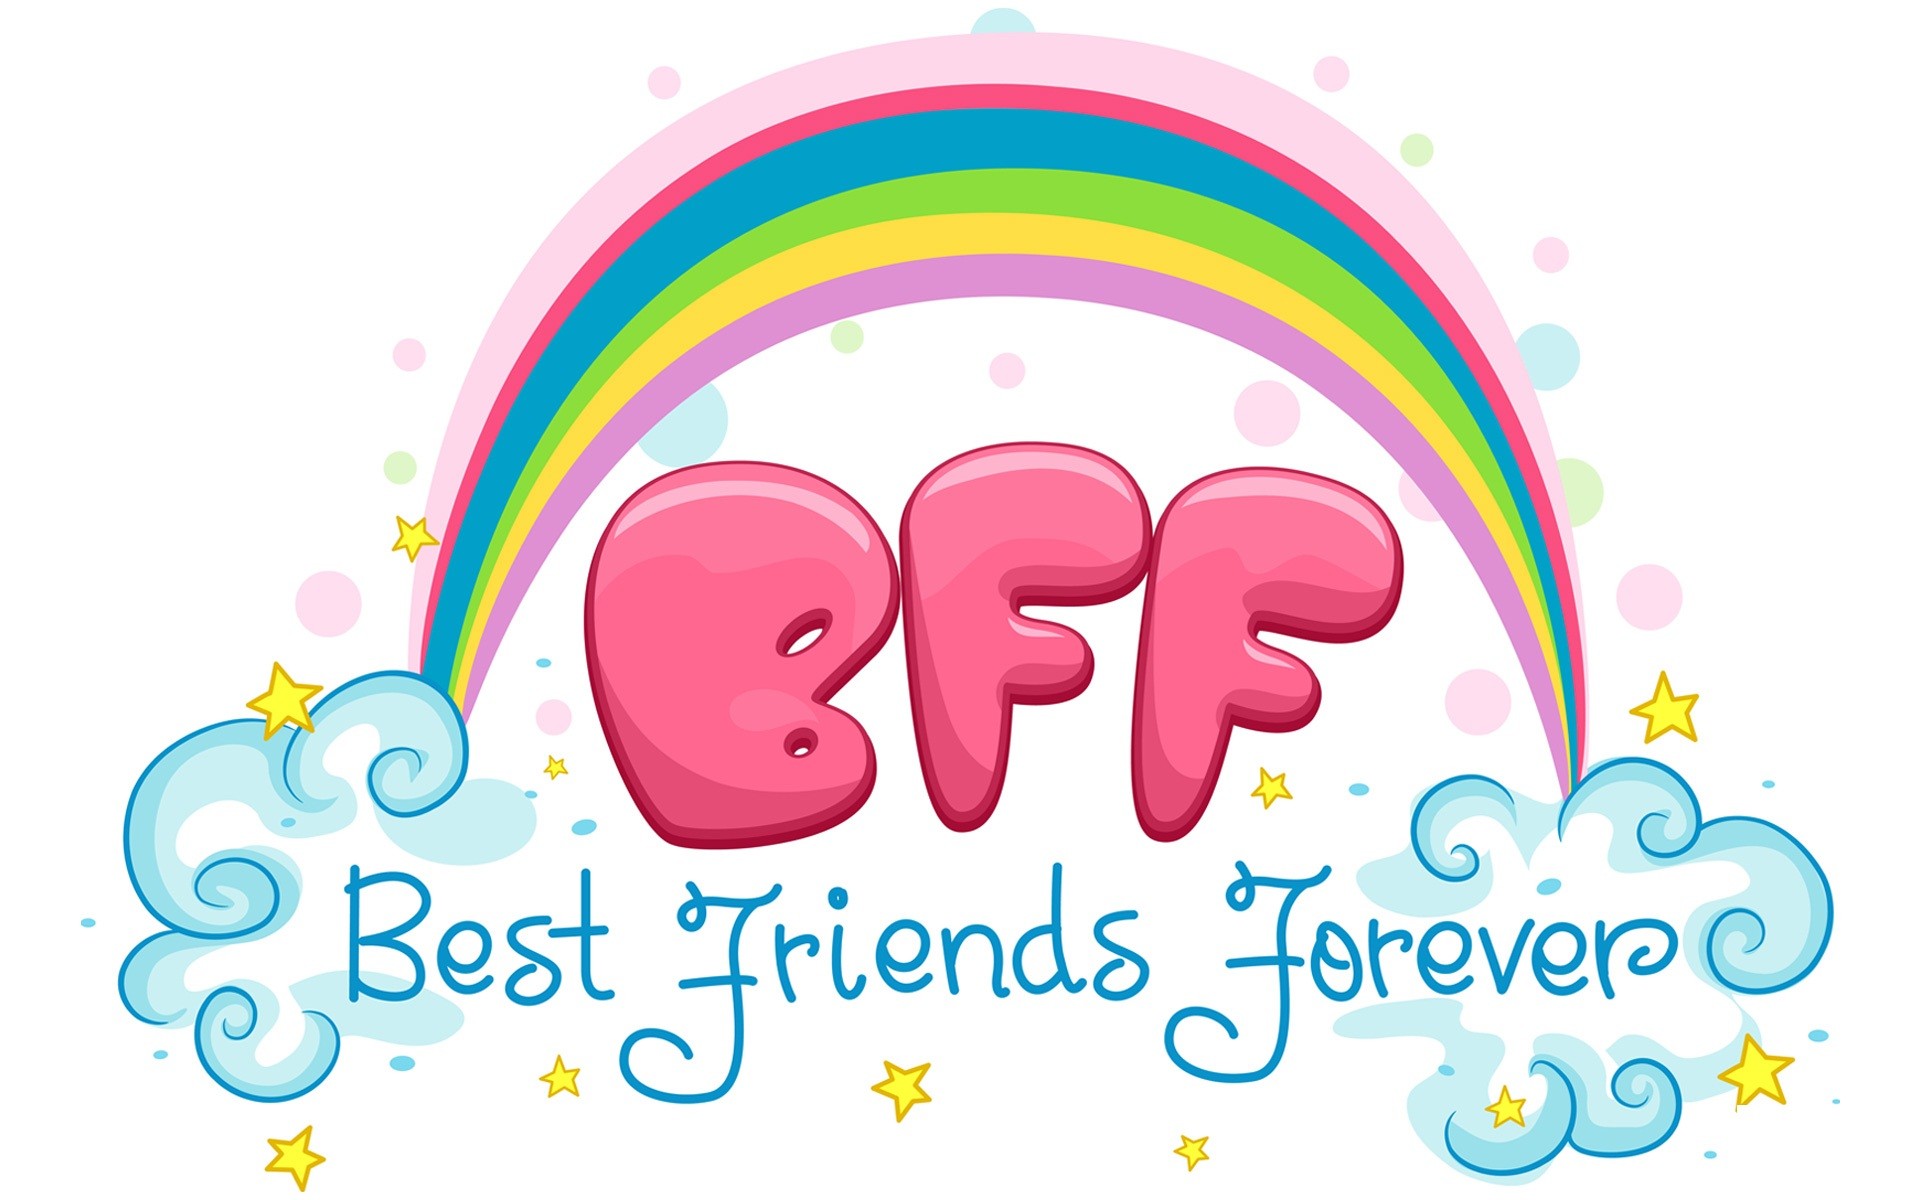 Best Friends Forever Backgrounds in Glitter (62+ pictures)